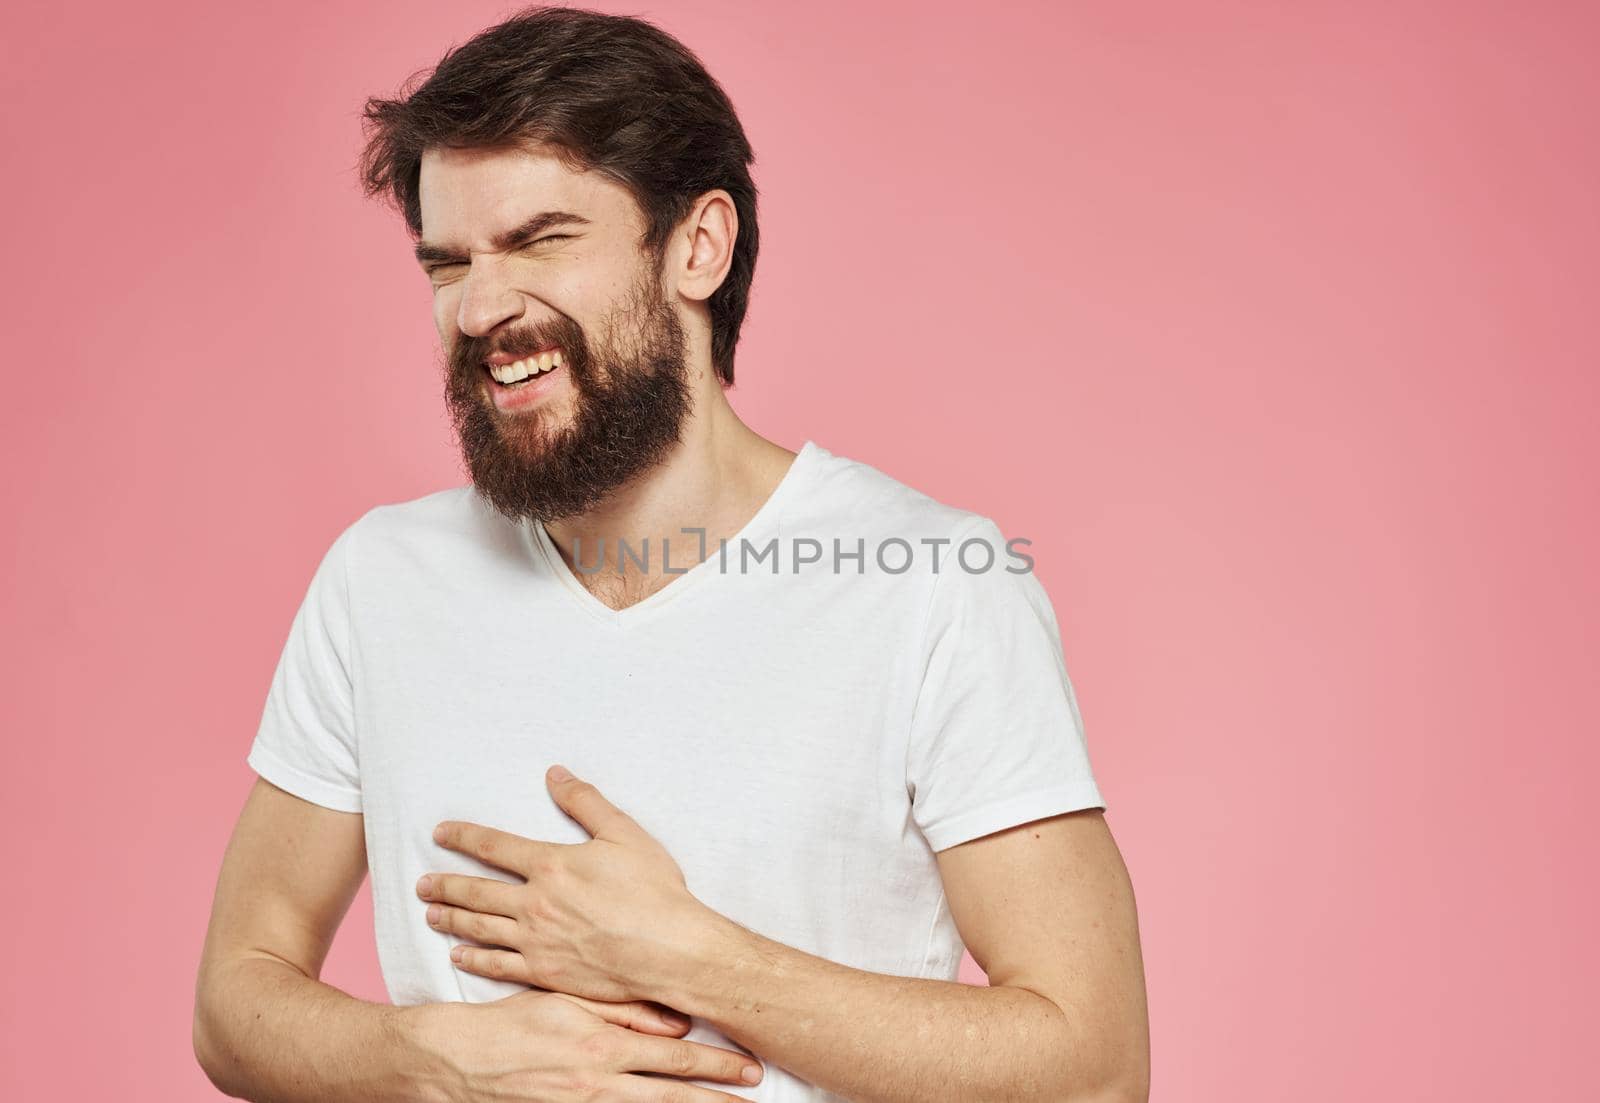 Emotional man gesturing with his hands on a pink background cropped view by SHOTPRIME